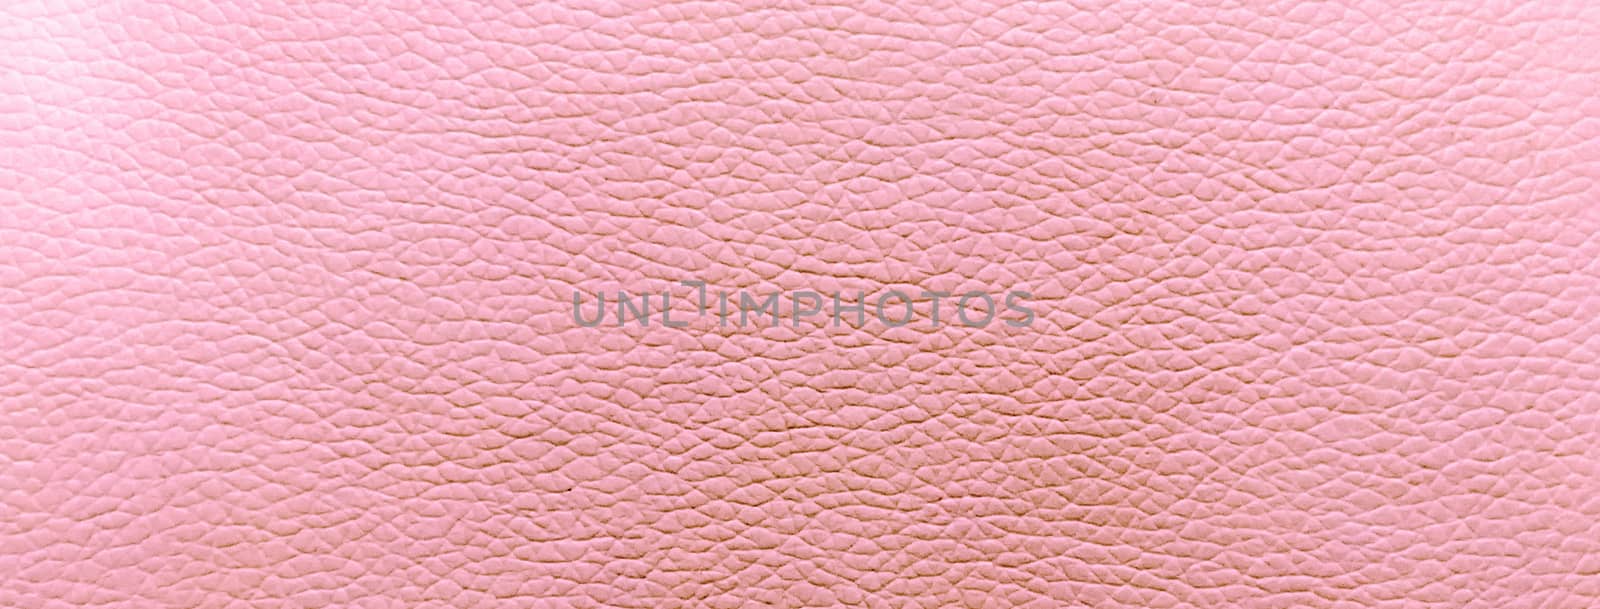 Background of a pink leather texture by marcorubino